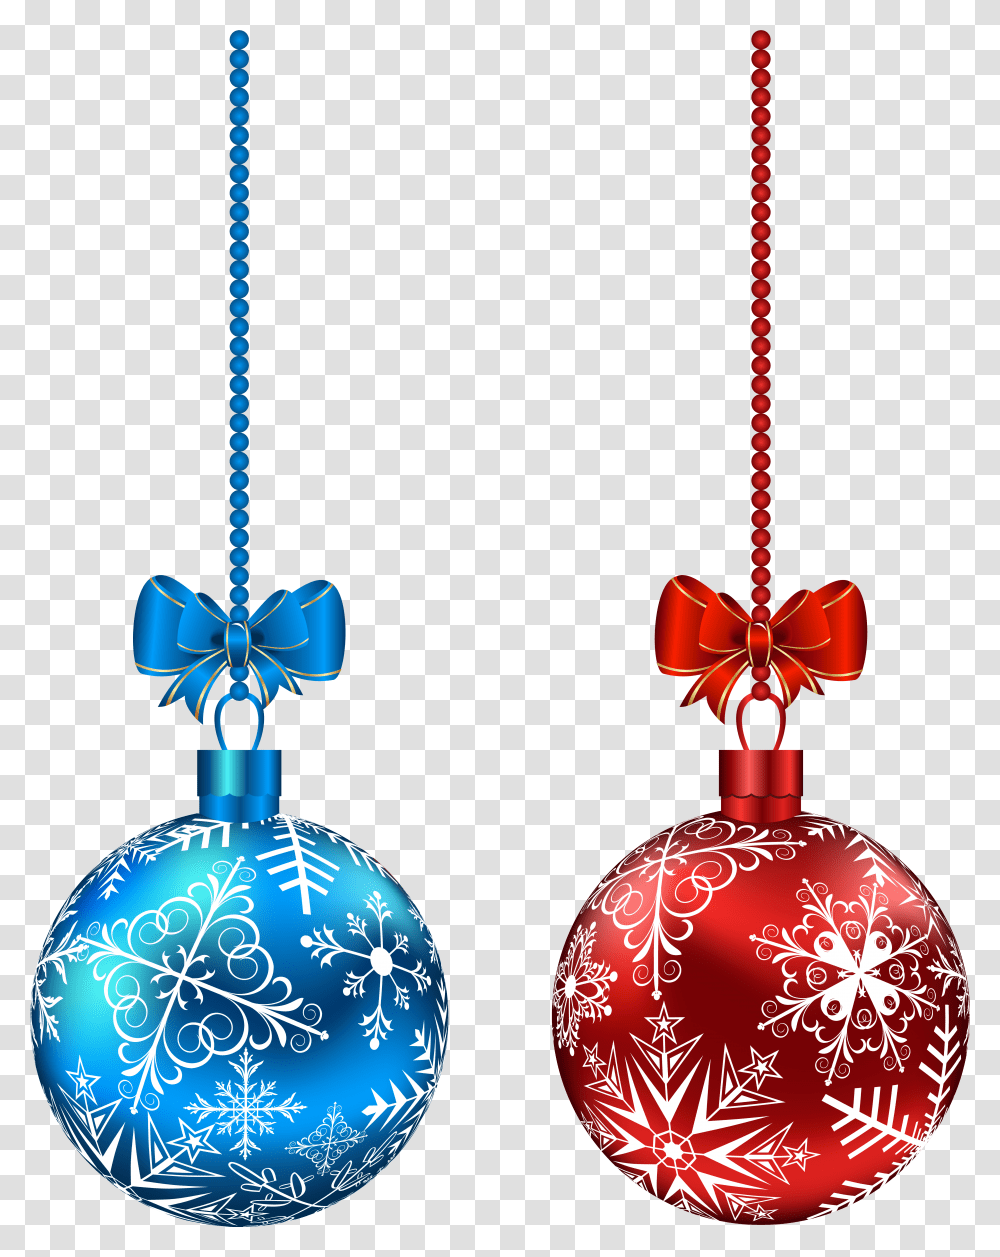 Blue Ornaments Hanging Picture 448761 Christmas Ornaments Blue Red, Pendant Transparent Png